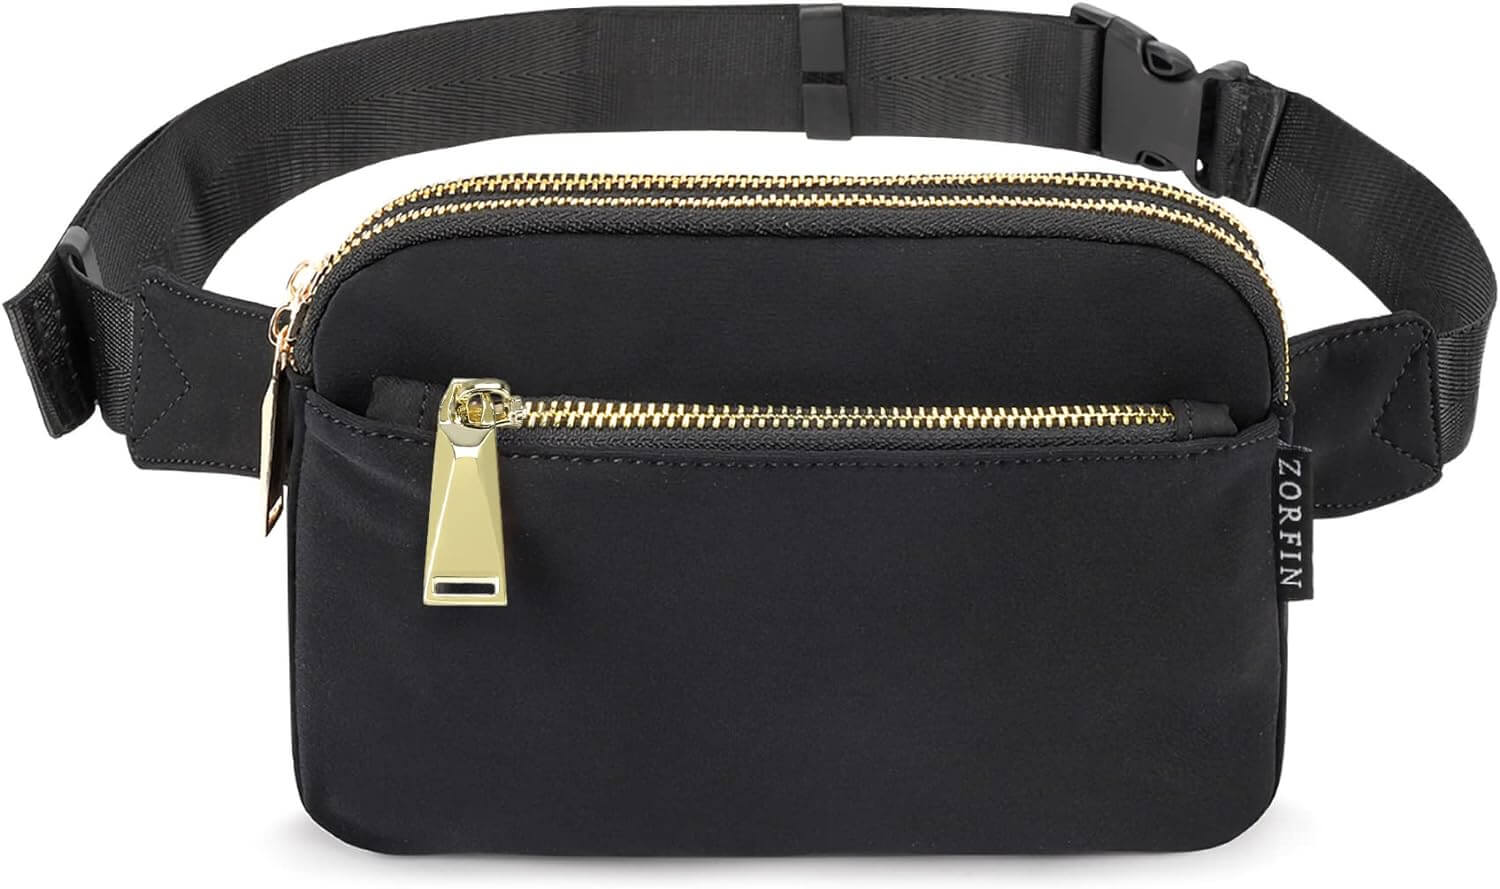 Zorfin Fanny Pack With Zipper